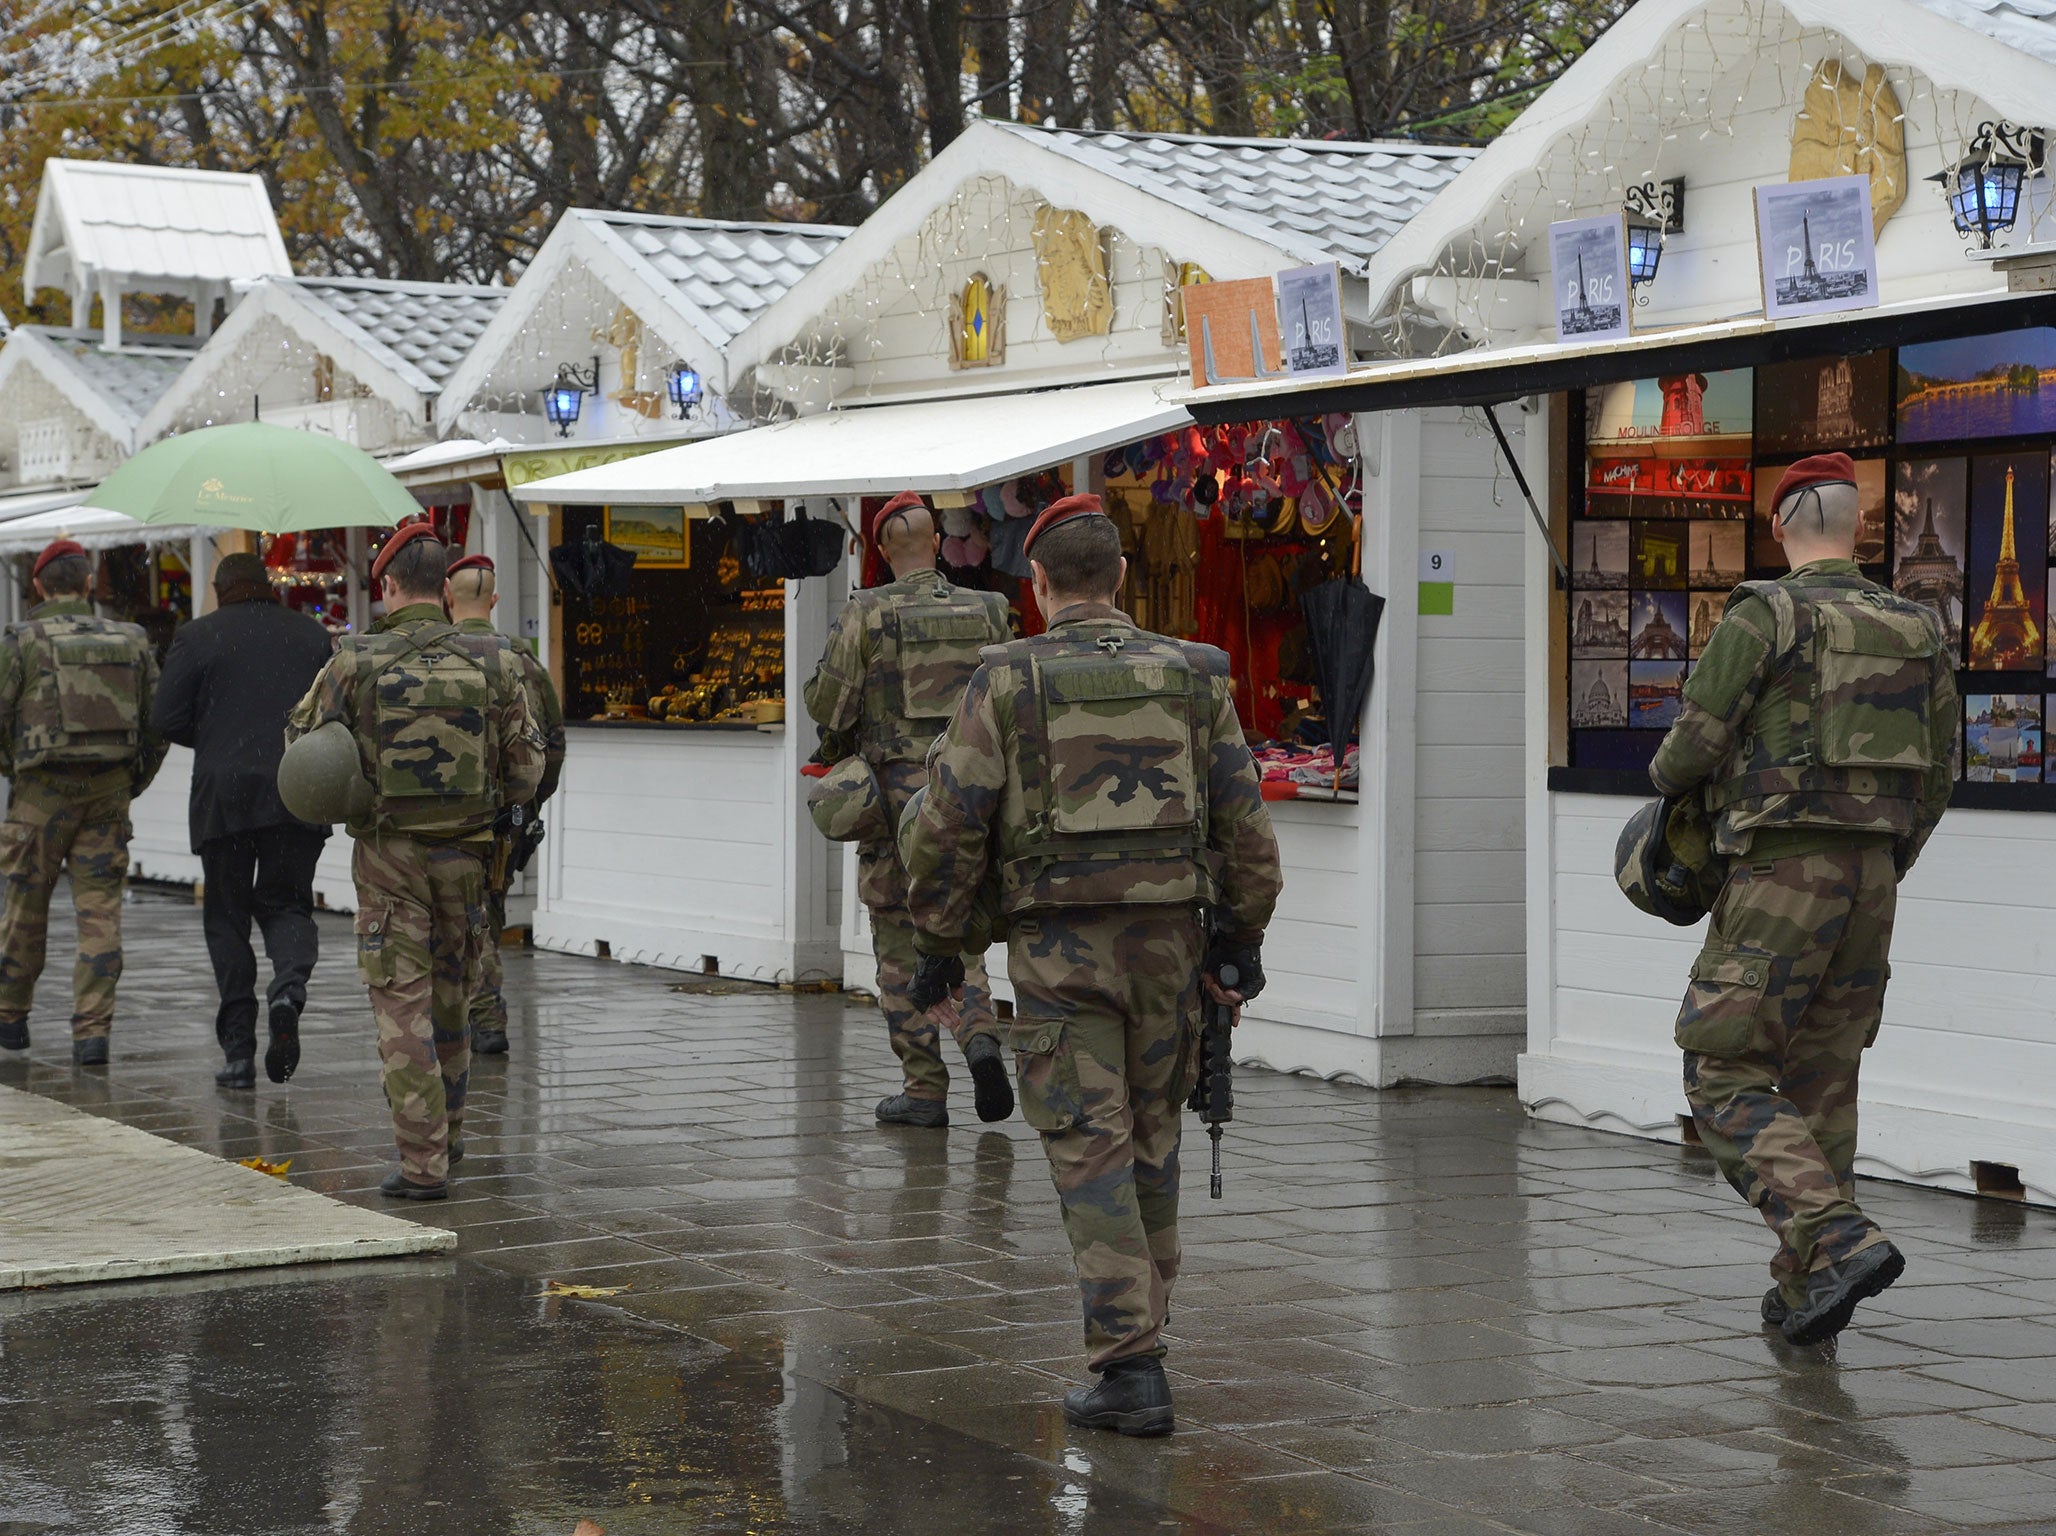 Caption:French soldiers patrol on the Champs-Elysees avenue on the reopening day of Paris' Christmas market, on November 19, 2015, as part of the security measures set following the November 13 attacks